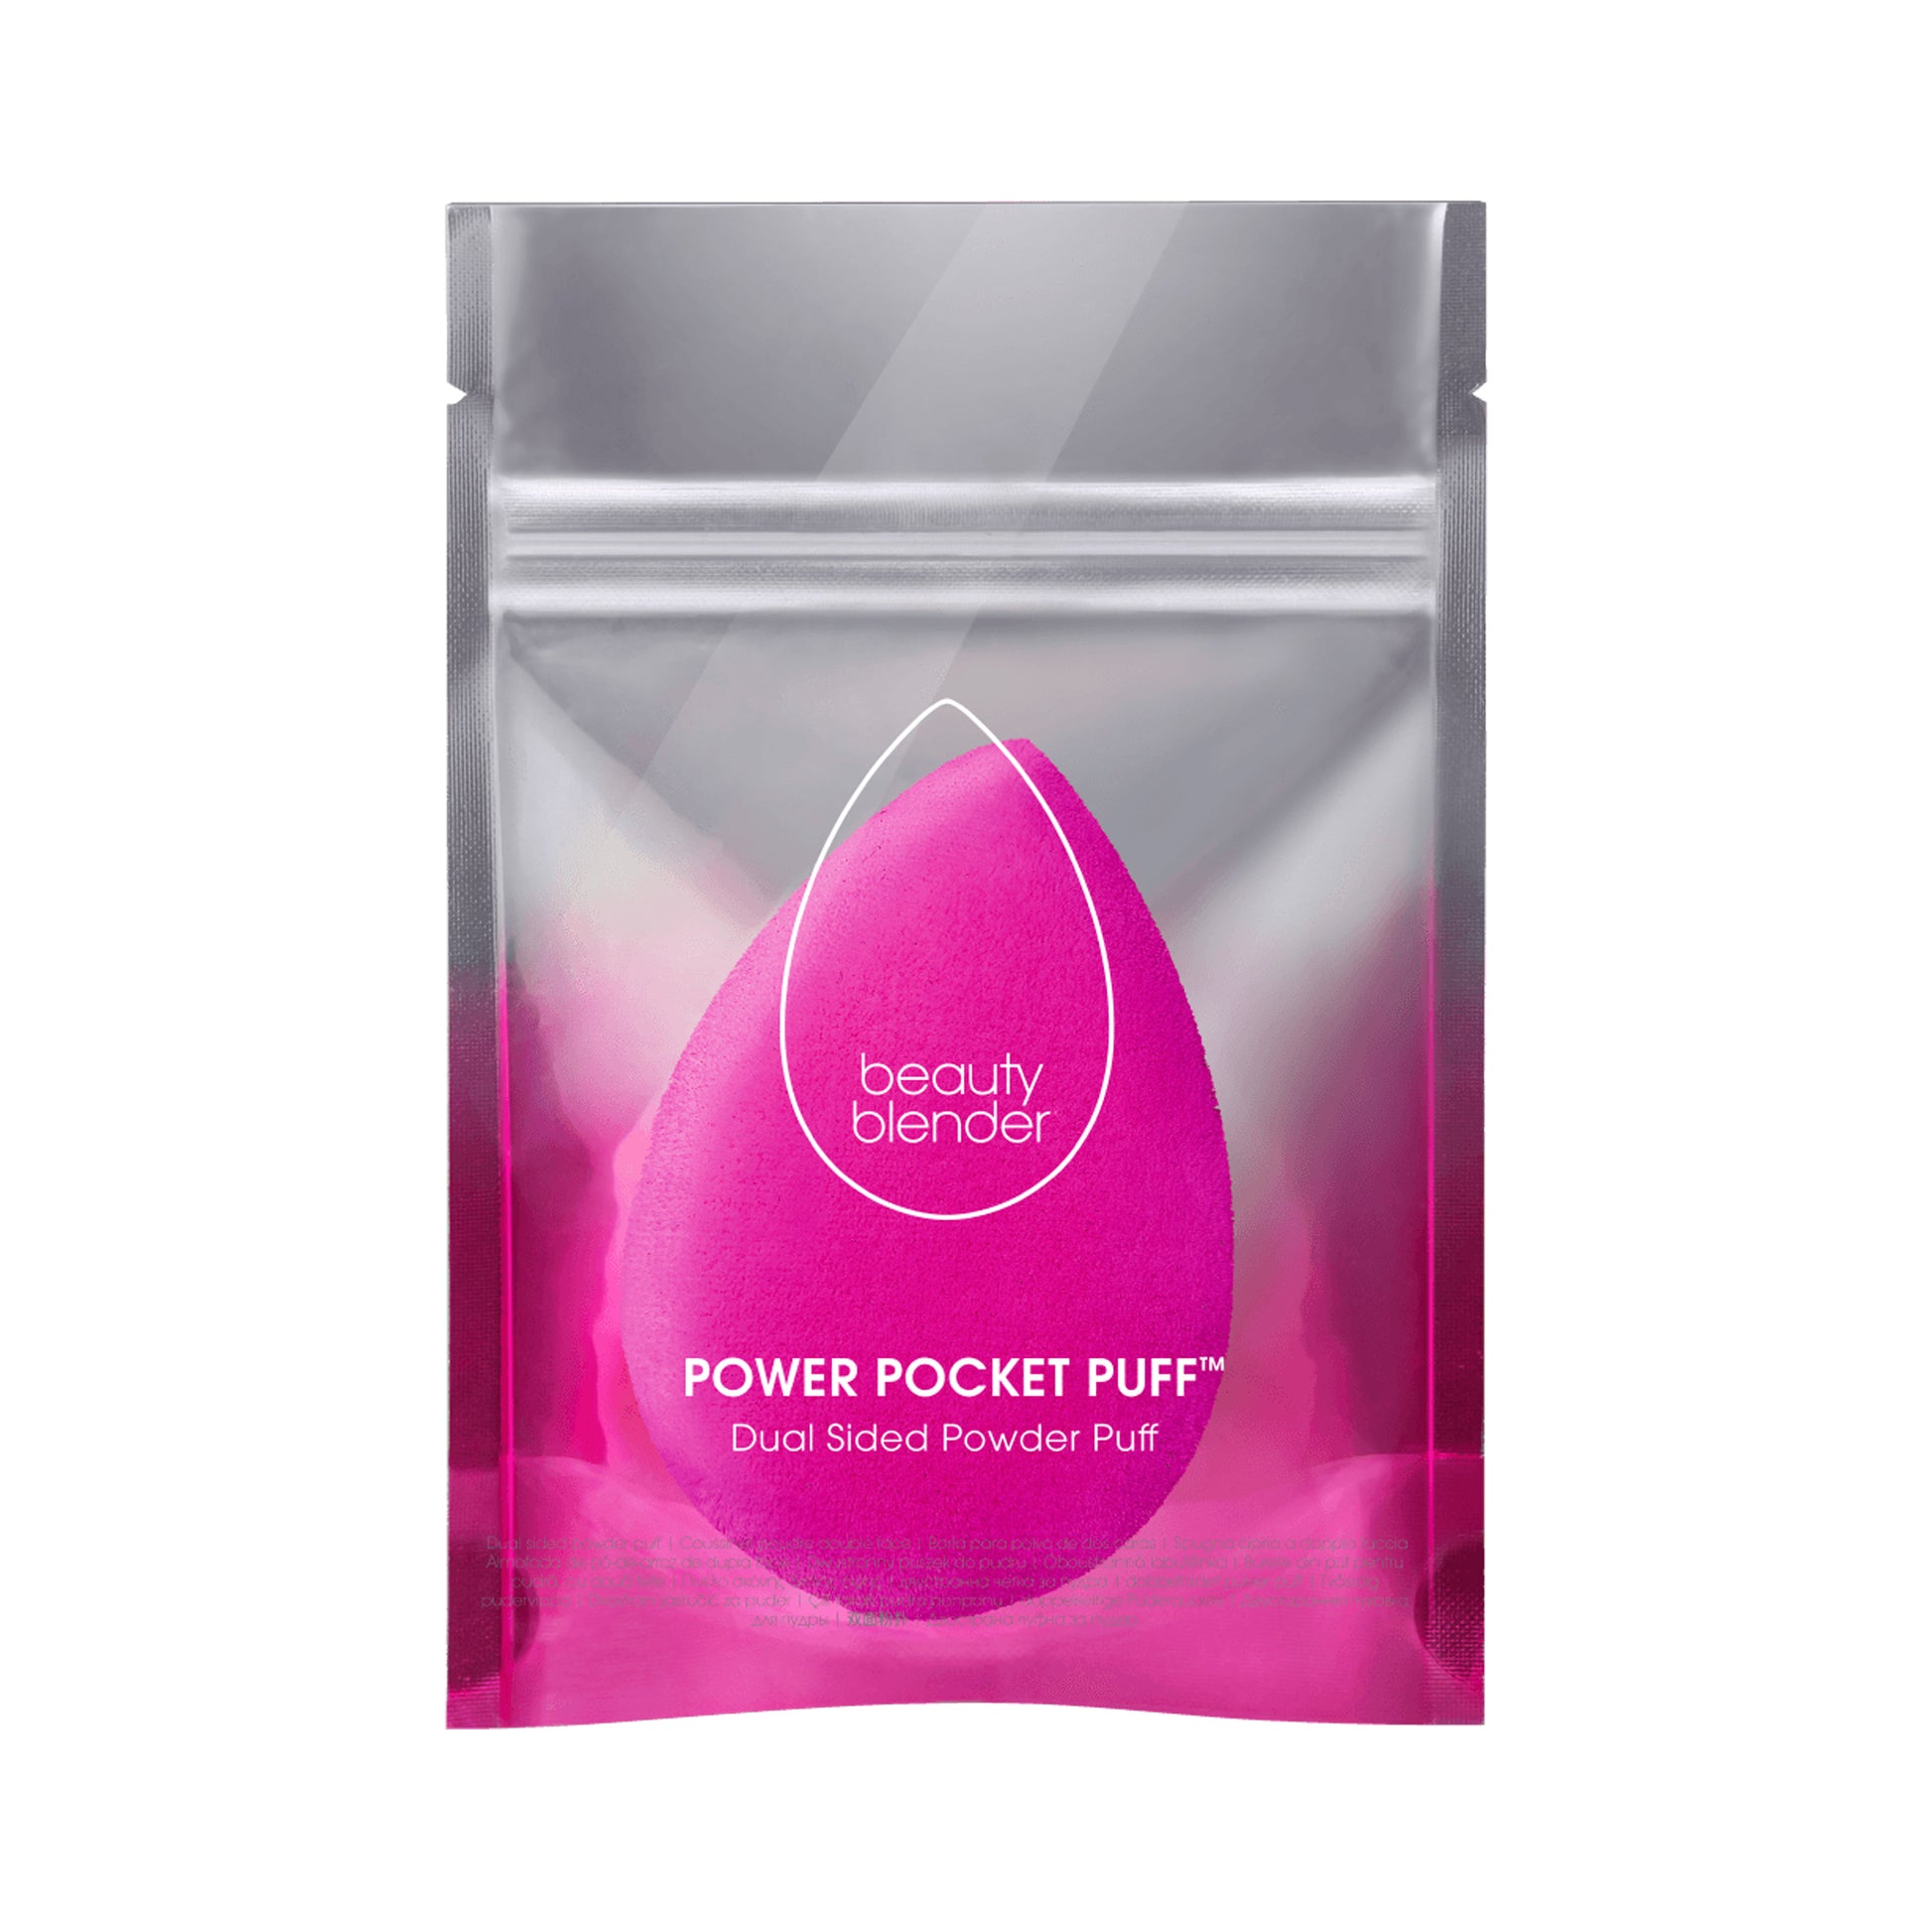 Beautyblender Power Pocket Puff In The Package